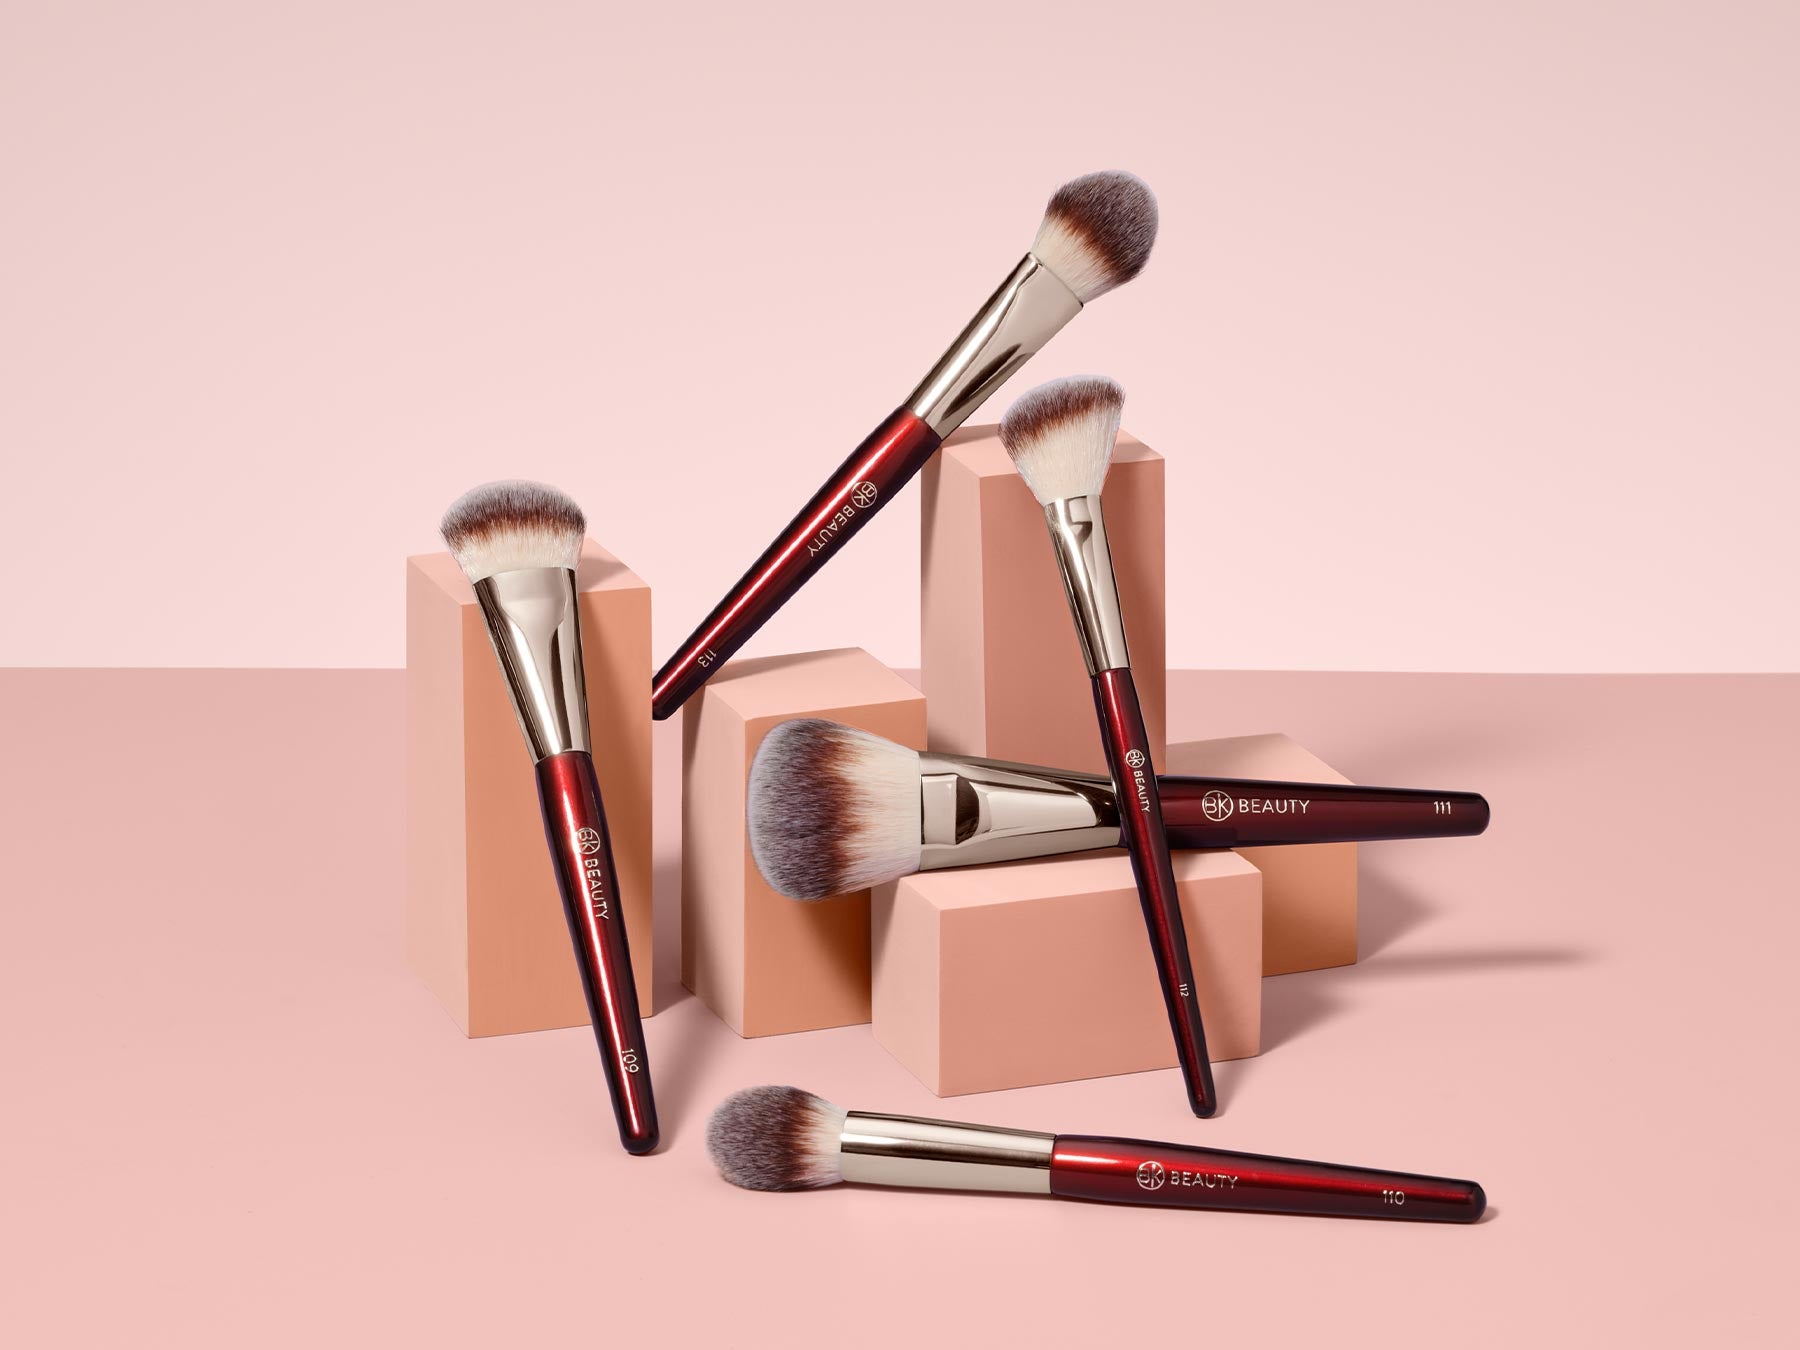 Prologue to BK Beauty Brushes